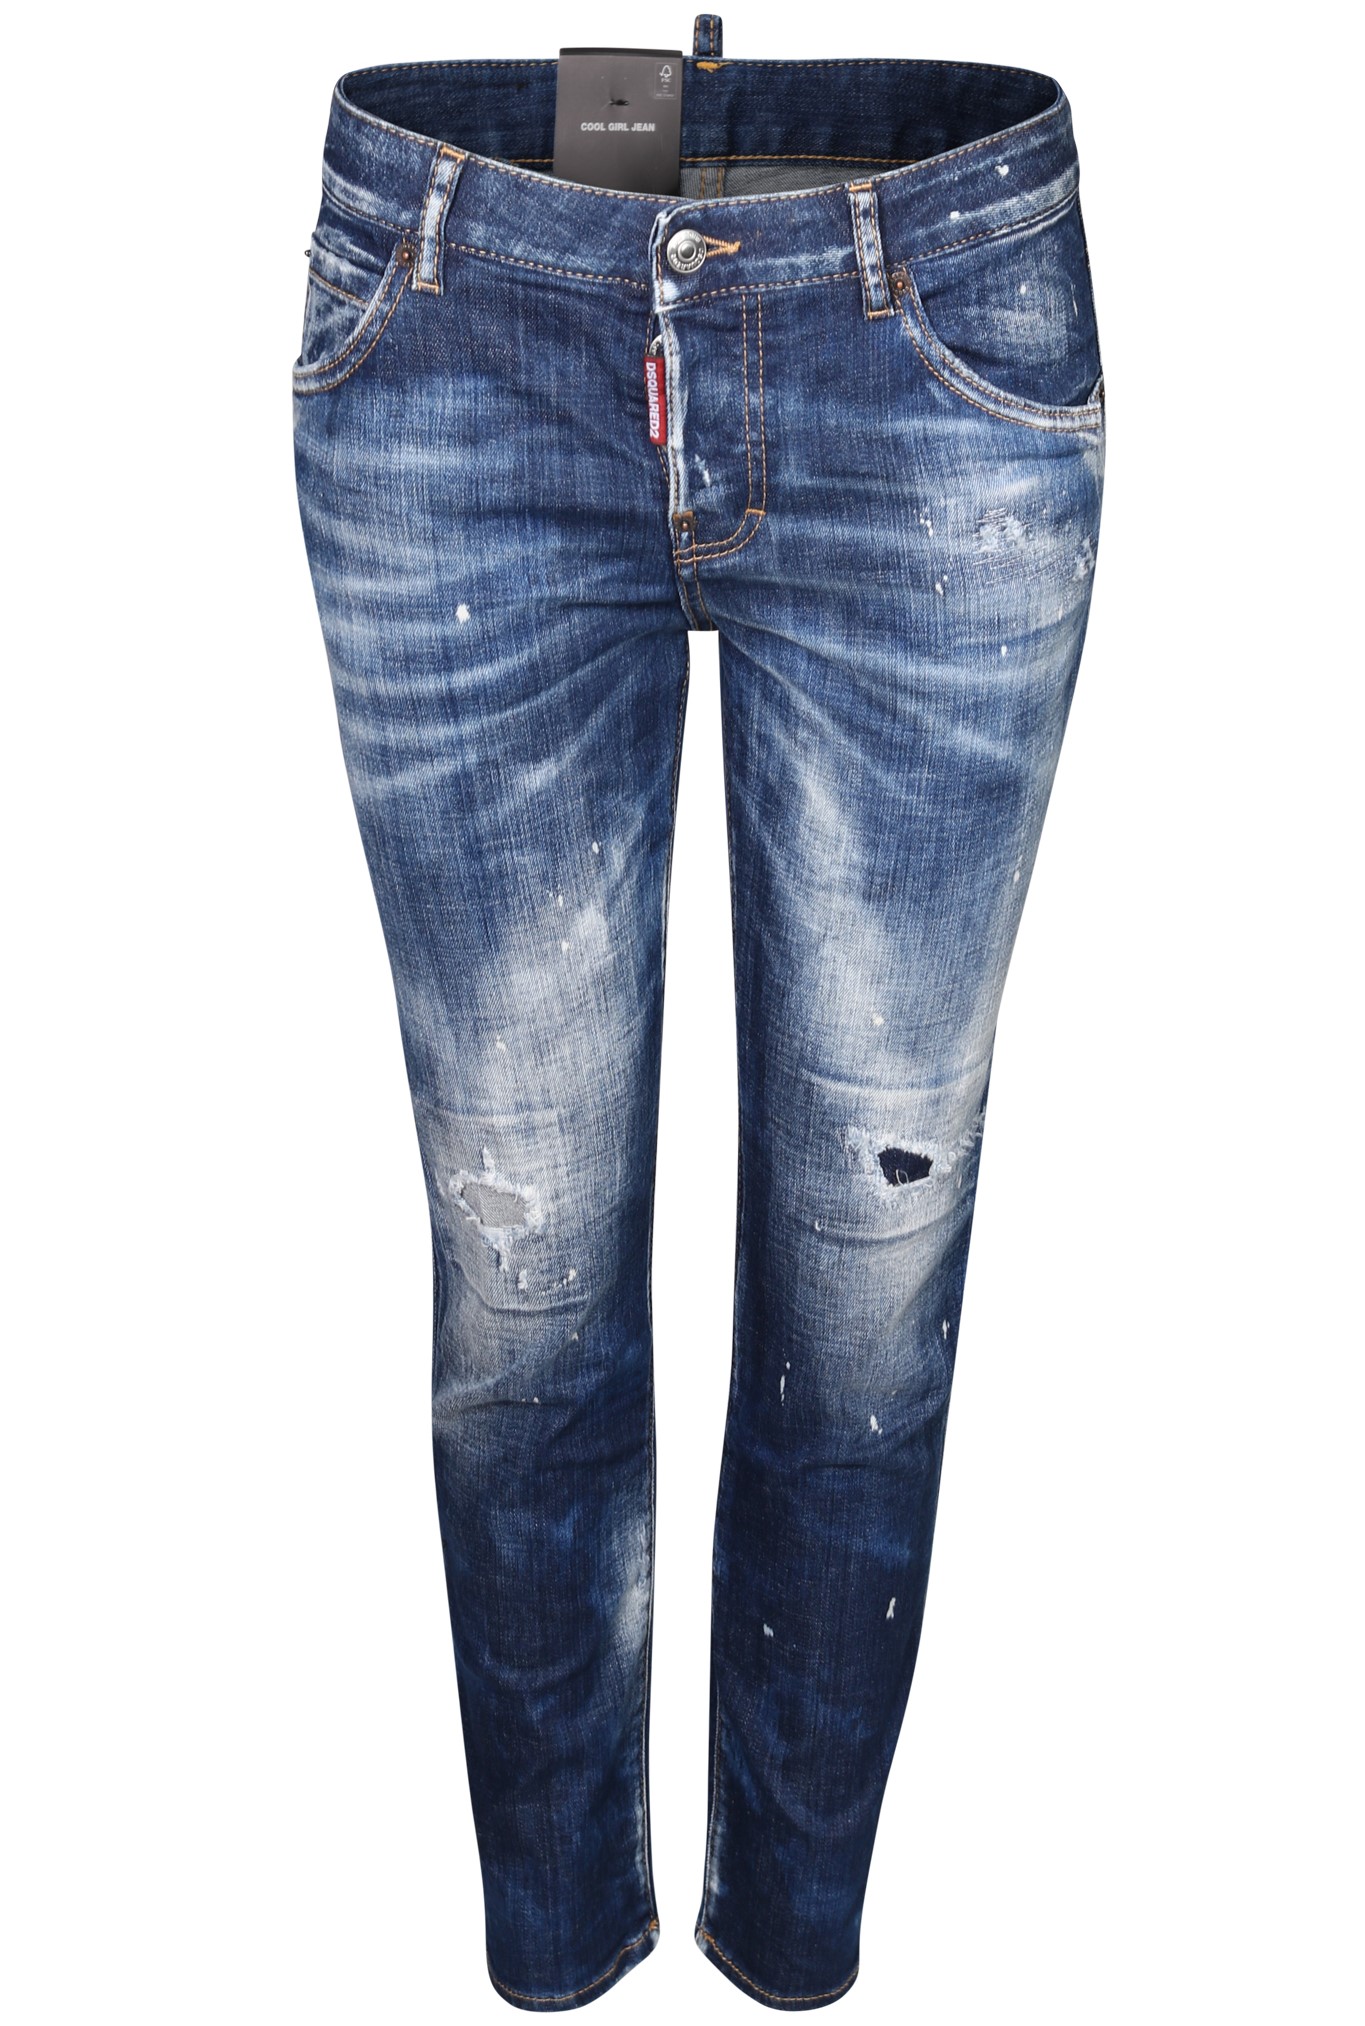 DSQUARED2 Cool Girl Jeans in Washed Dark Blue